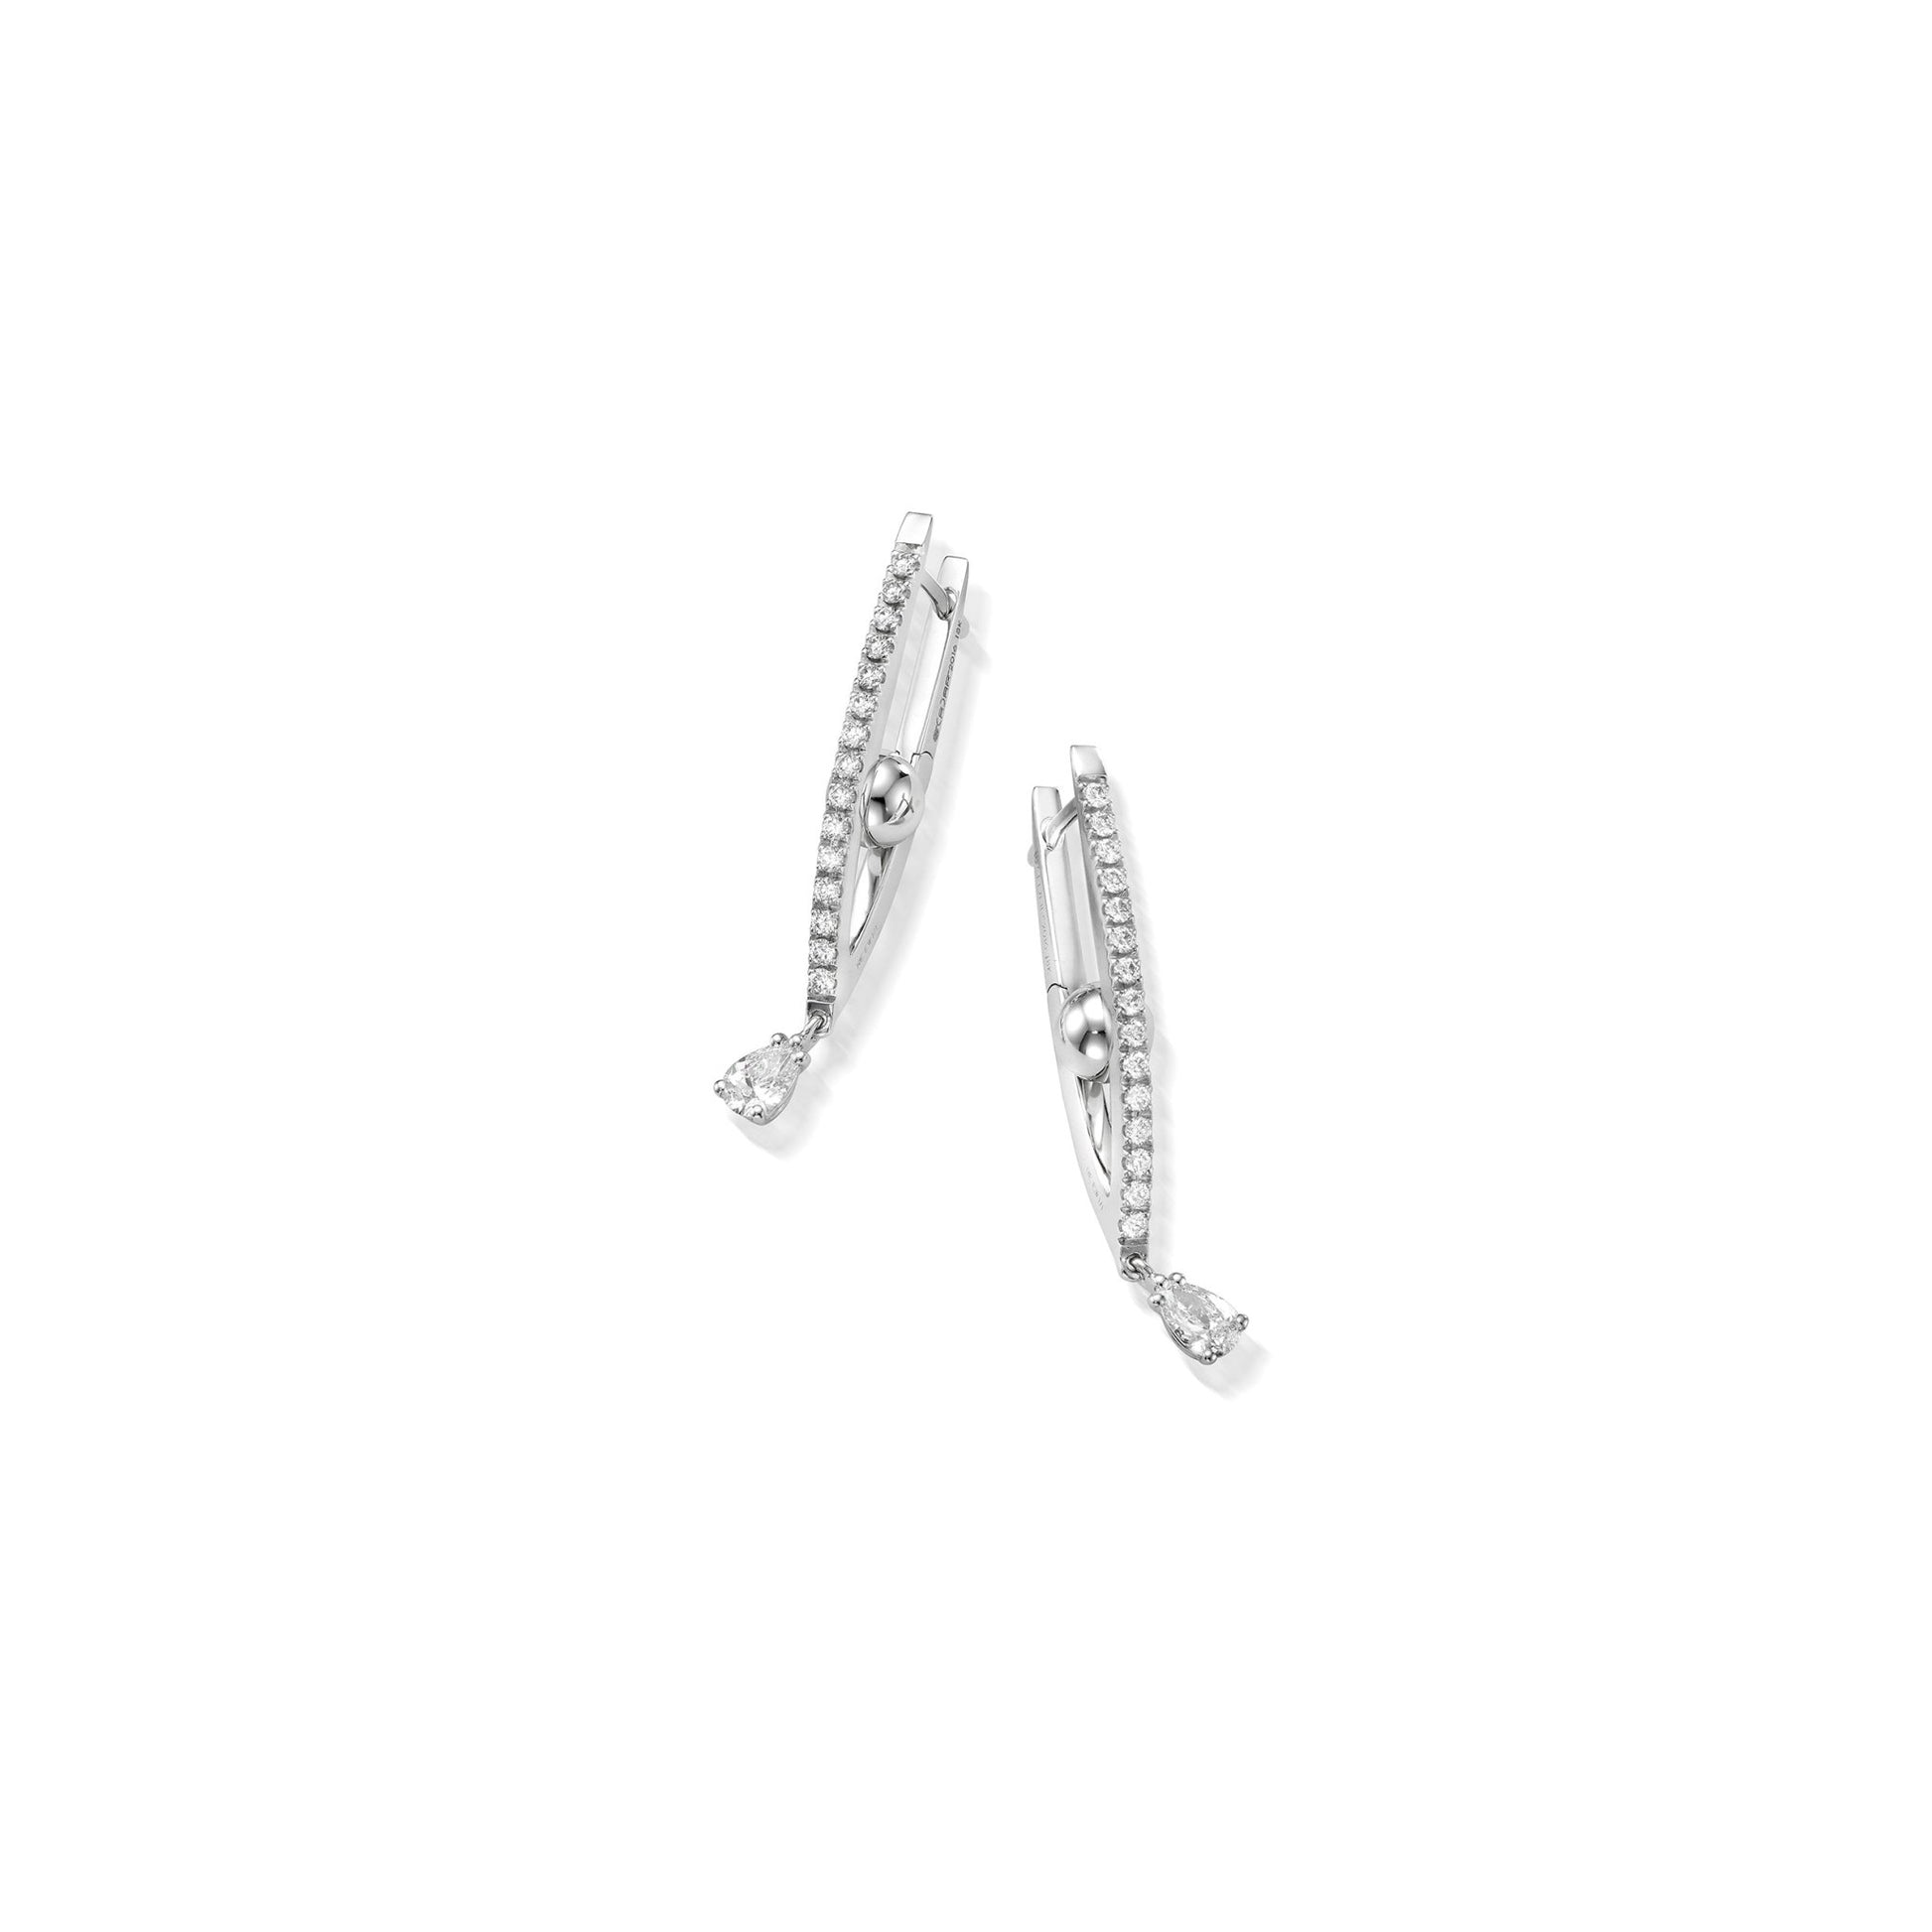 Small White Gold Reflections Hoop Earrings with White Diamonds - Cadar